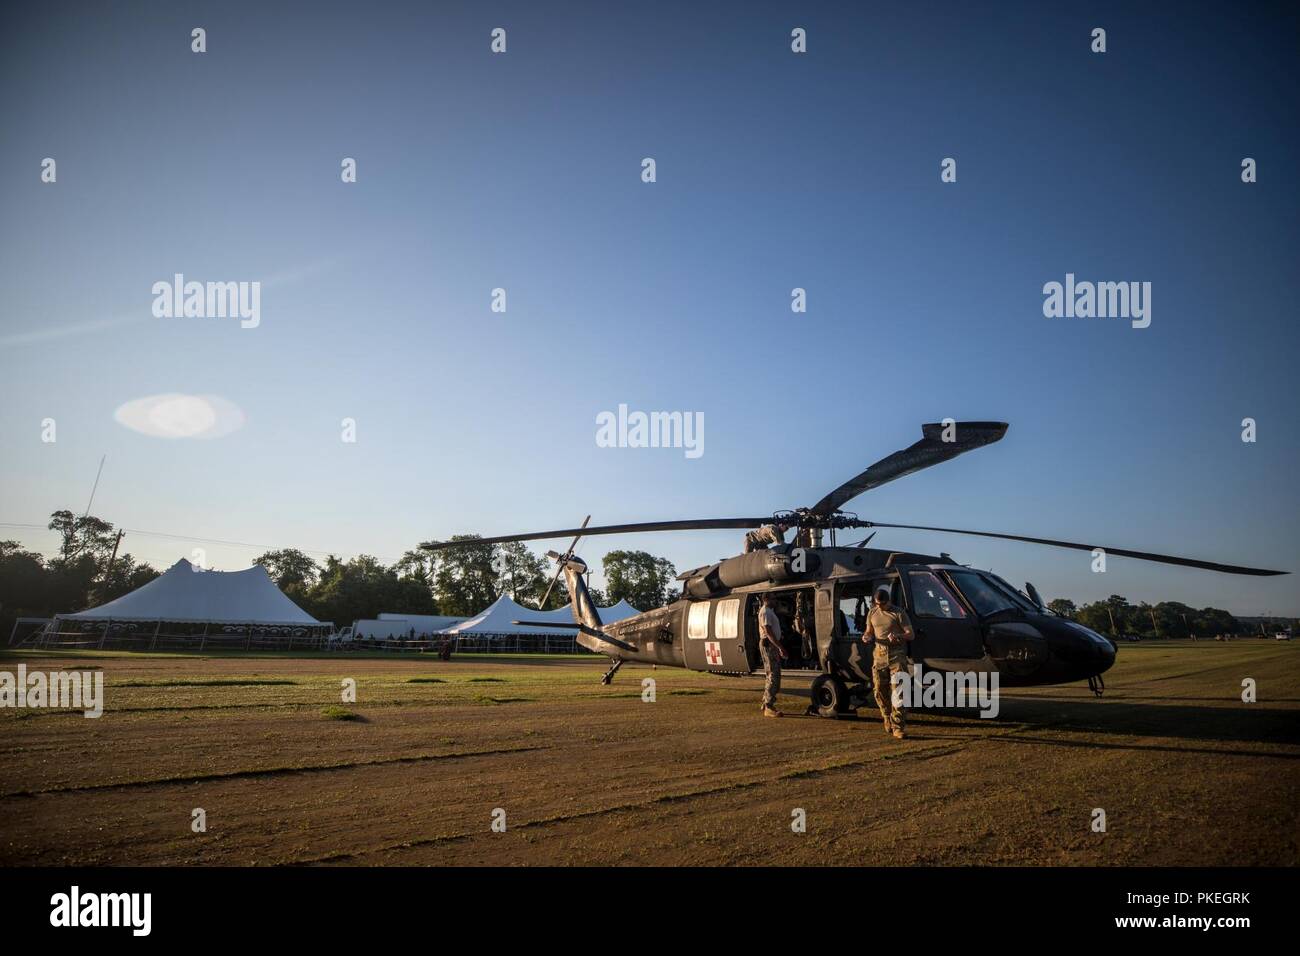 U.S. Army Soldiers assigned to 1-171st GSAB (Medevac), Rochester, N.Y., prepare a UH-60 Blackhawk before competition jumps begin during Leapfest at the University of Rhode Island, West Kingston, R.I., Aug. 5, 2018. Leapfest is the largest, longest standing, international static line parachute training event and competition hosted by the 56th Troop Command, Rhode Island Army National Guard to promote high level technical and esprit de corps within the International Airborne community. Stock Photo